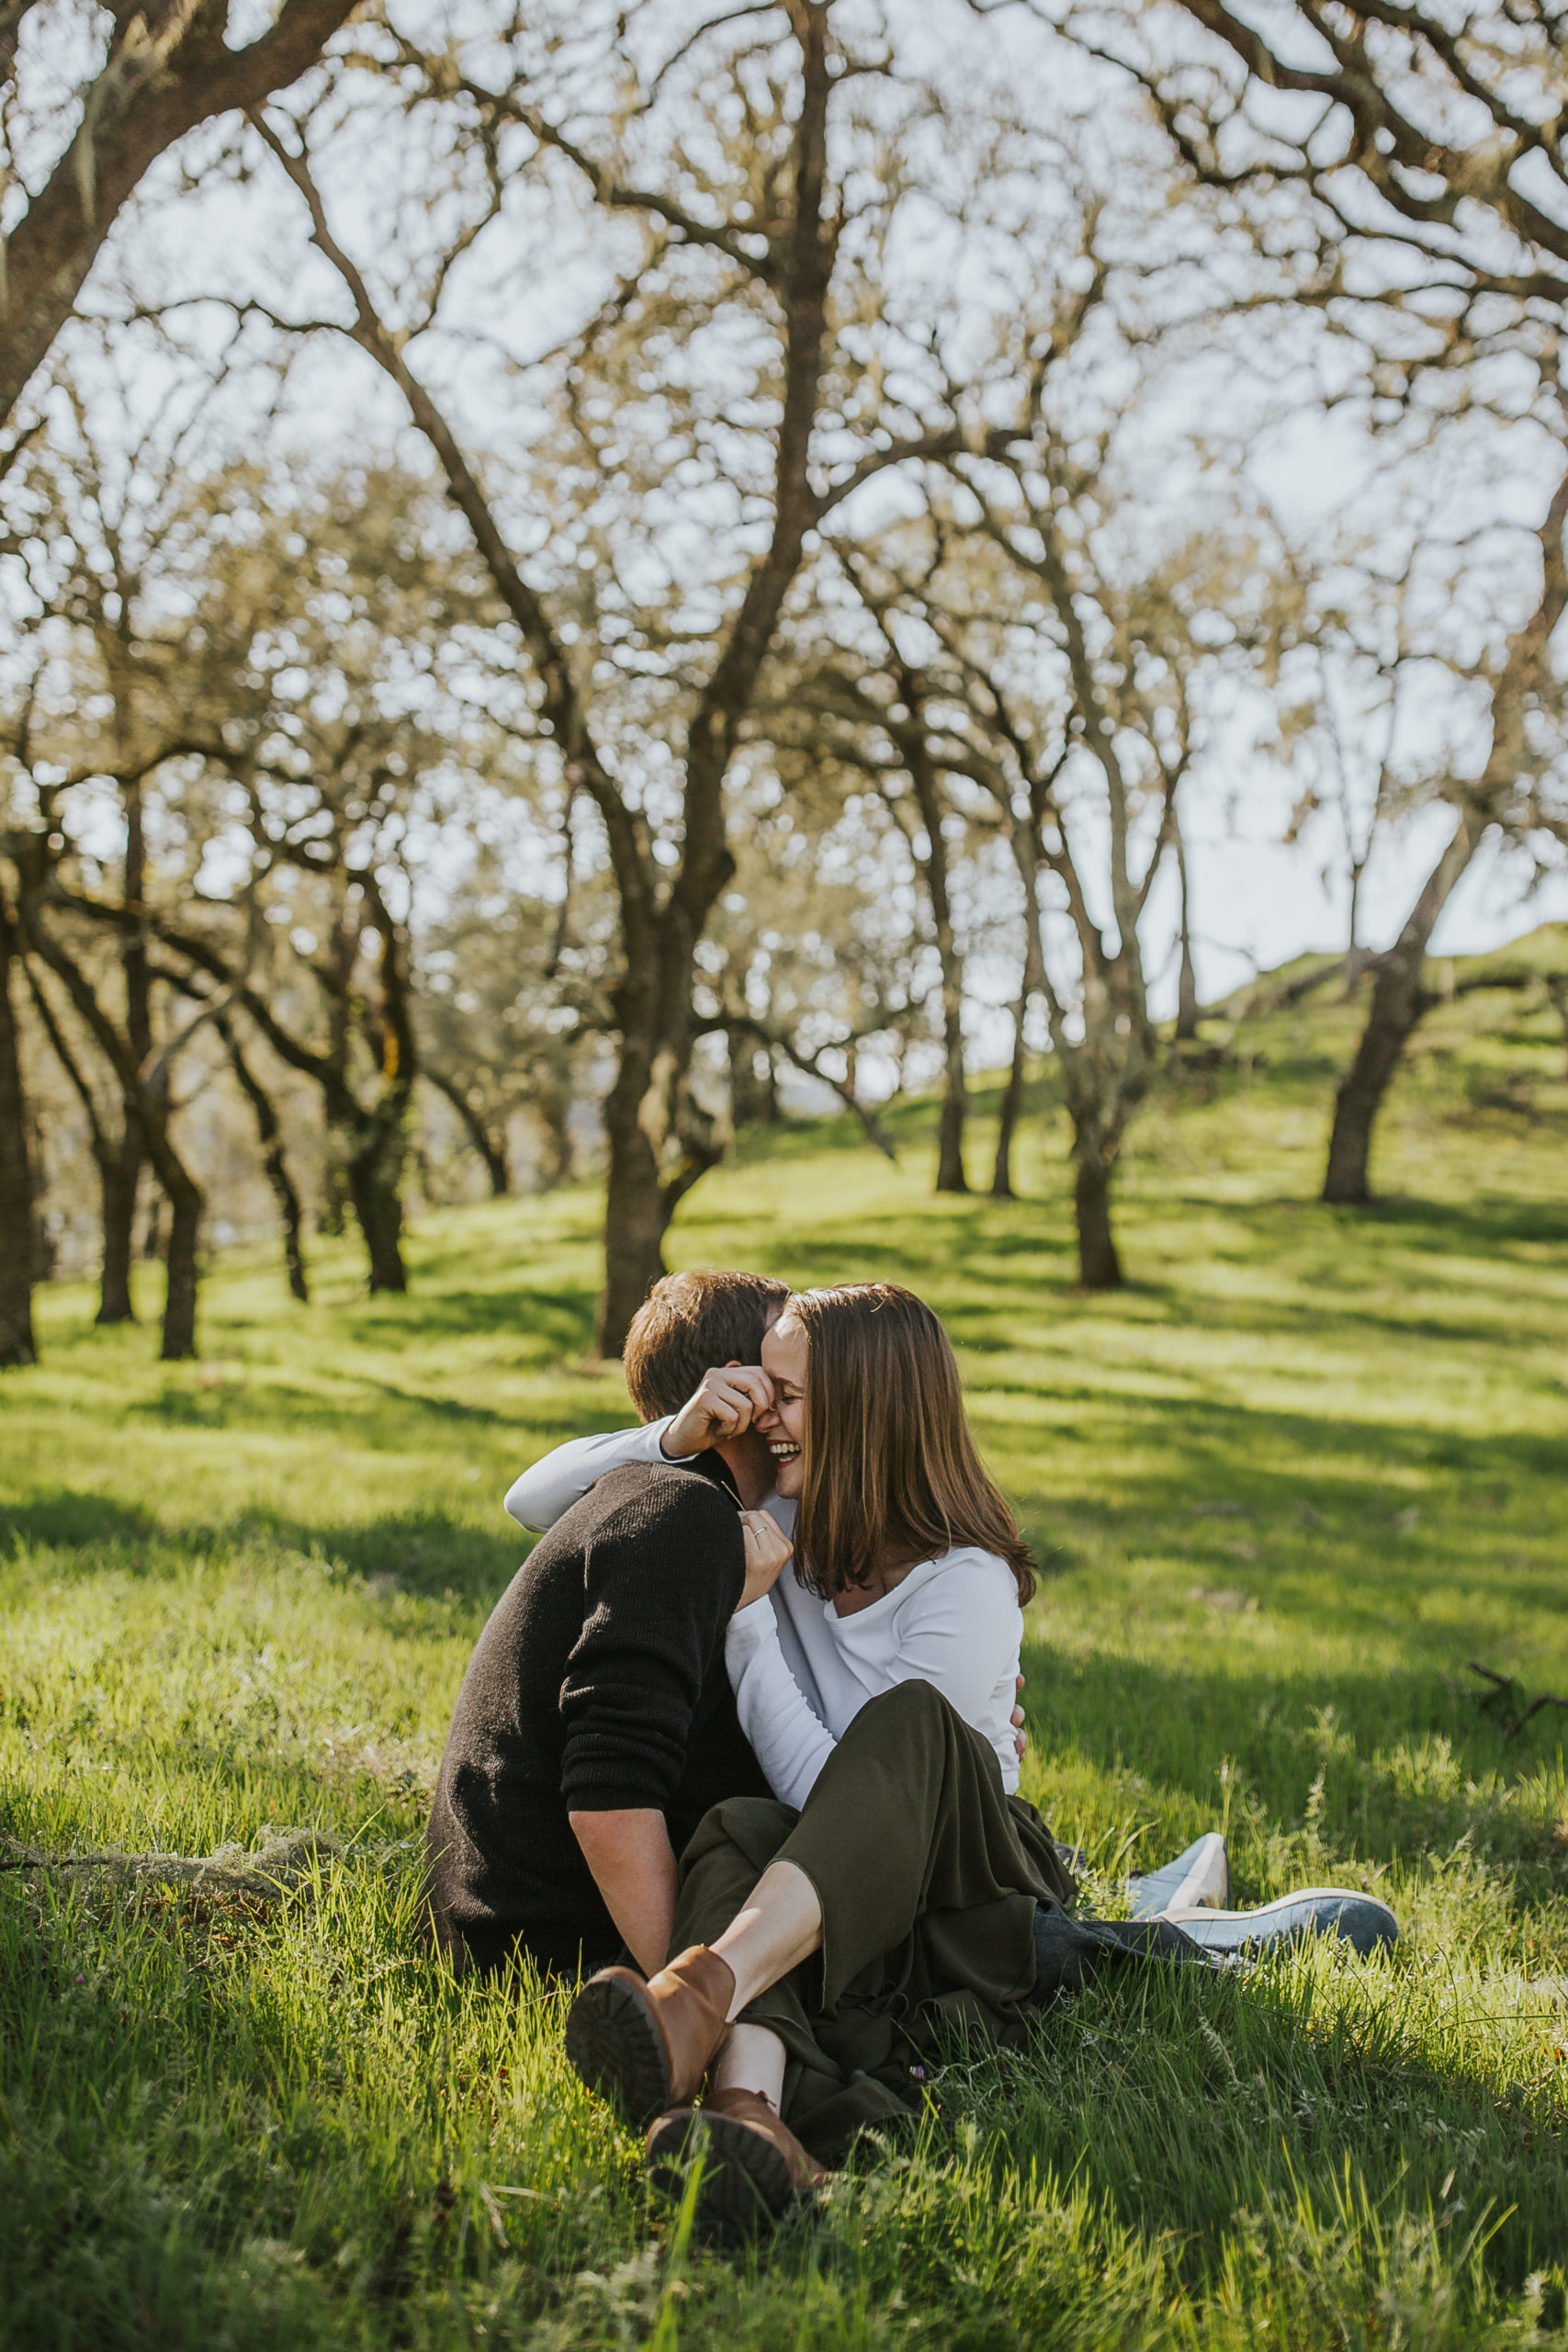 rebecca skidgel photography napa valley engagement photographer lake hennessey couple holding each other sitting laughing smiling